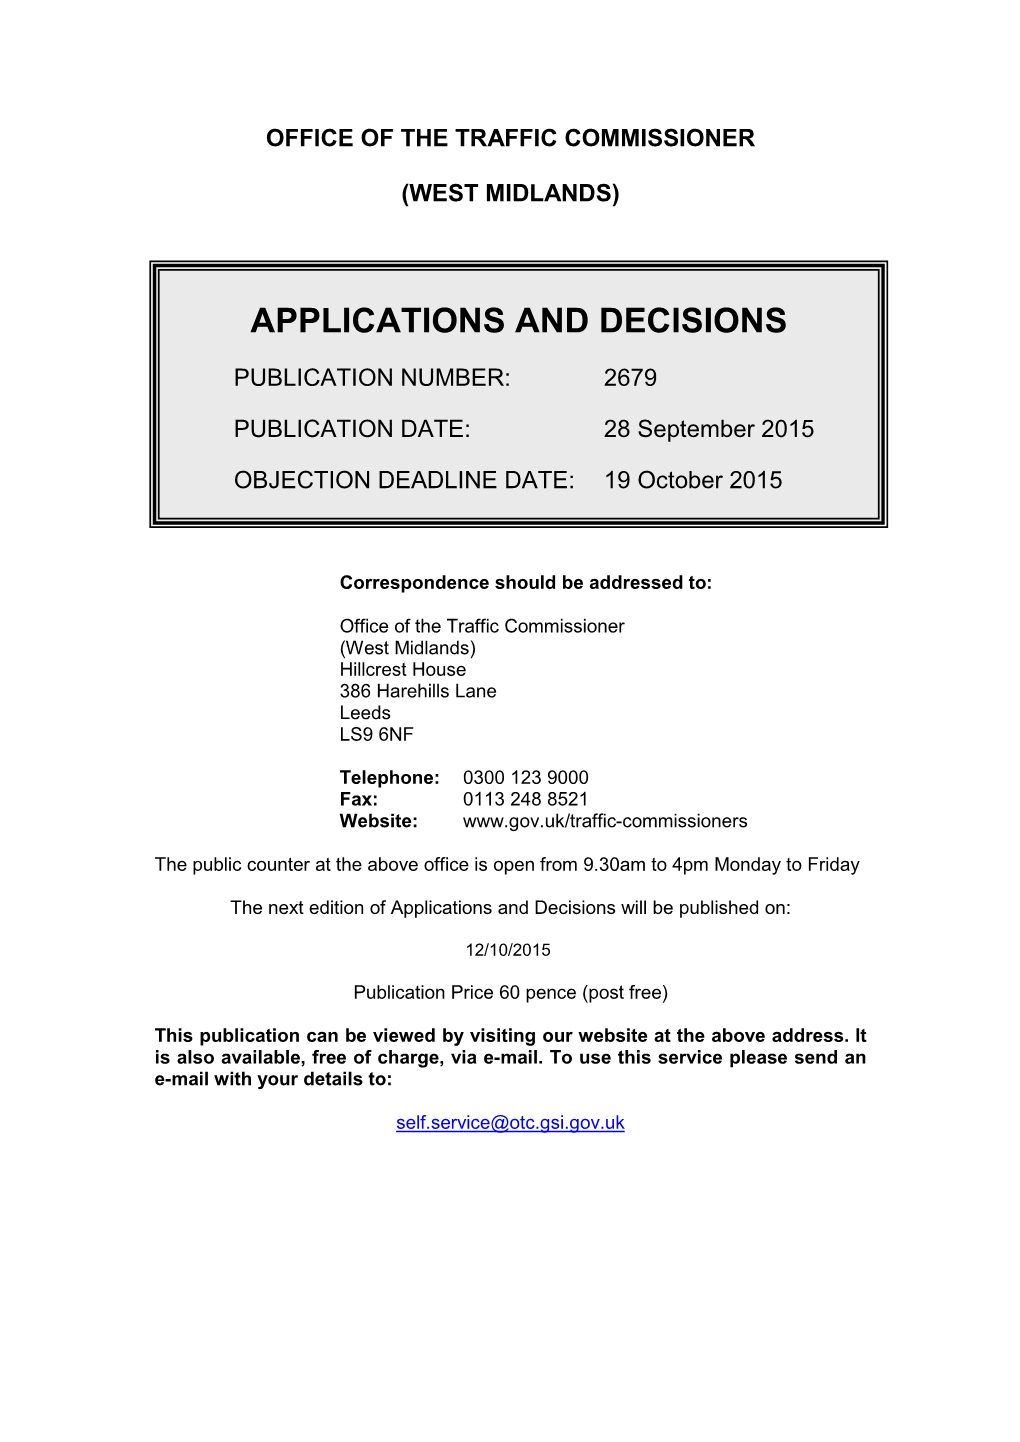 APPLICATIONS and DECISIONS 28 September 2015